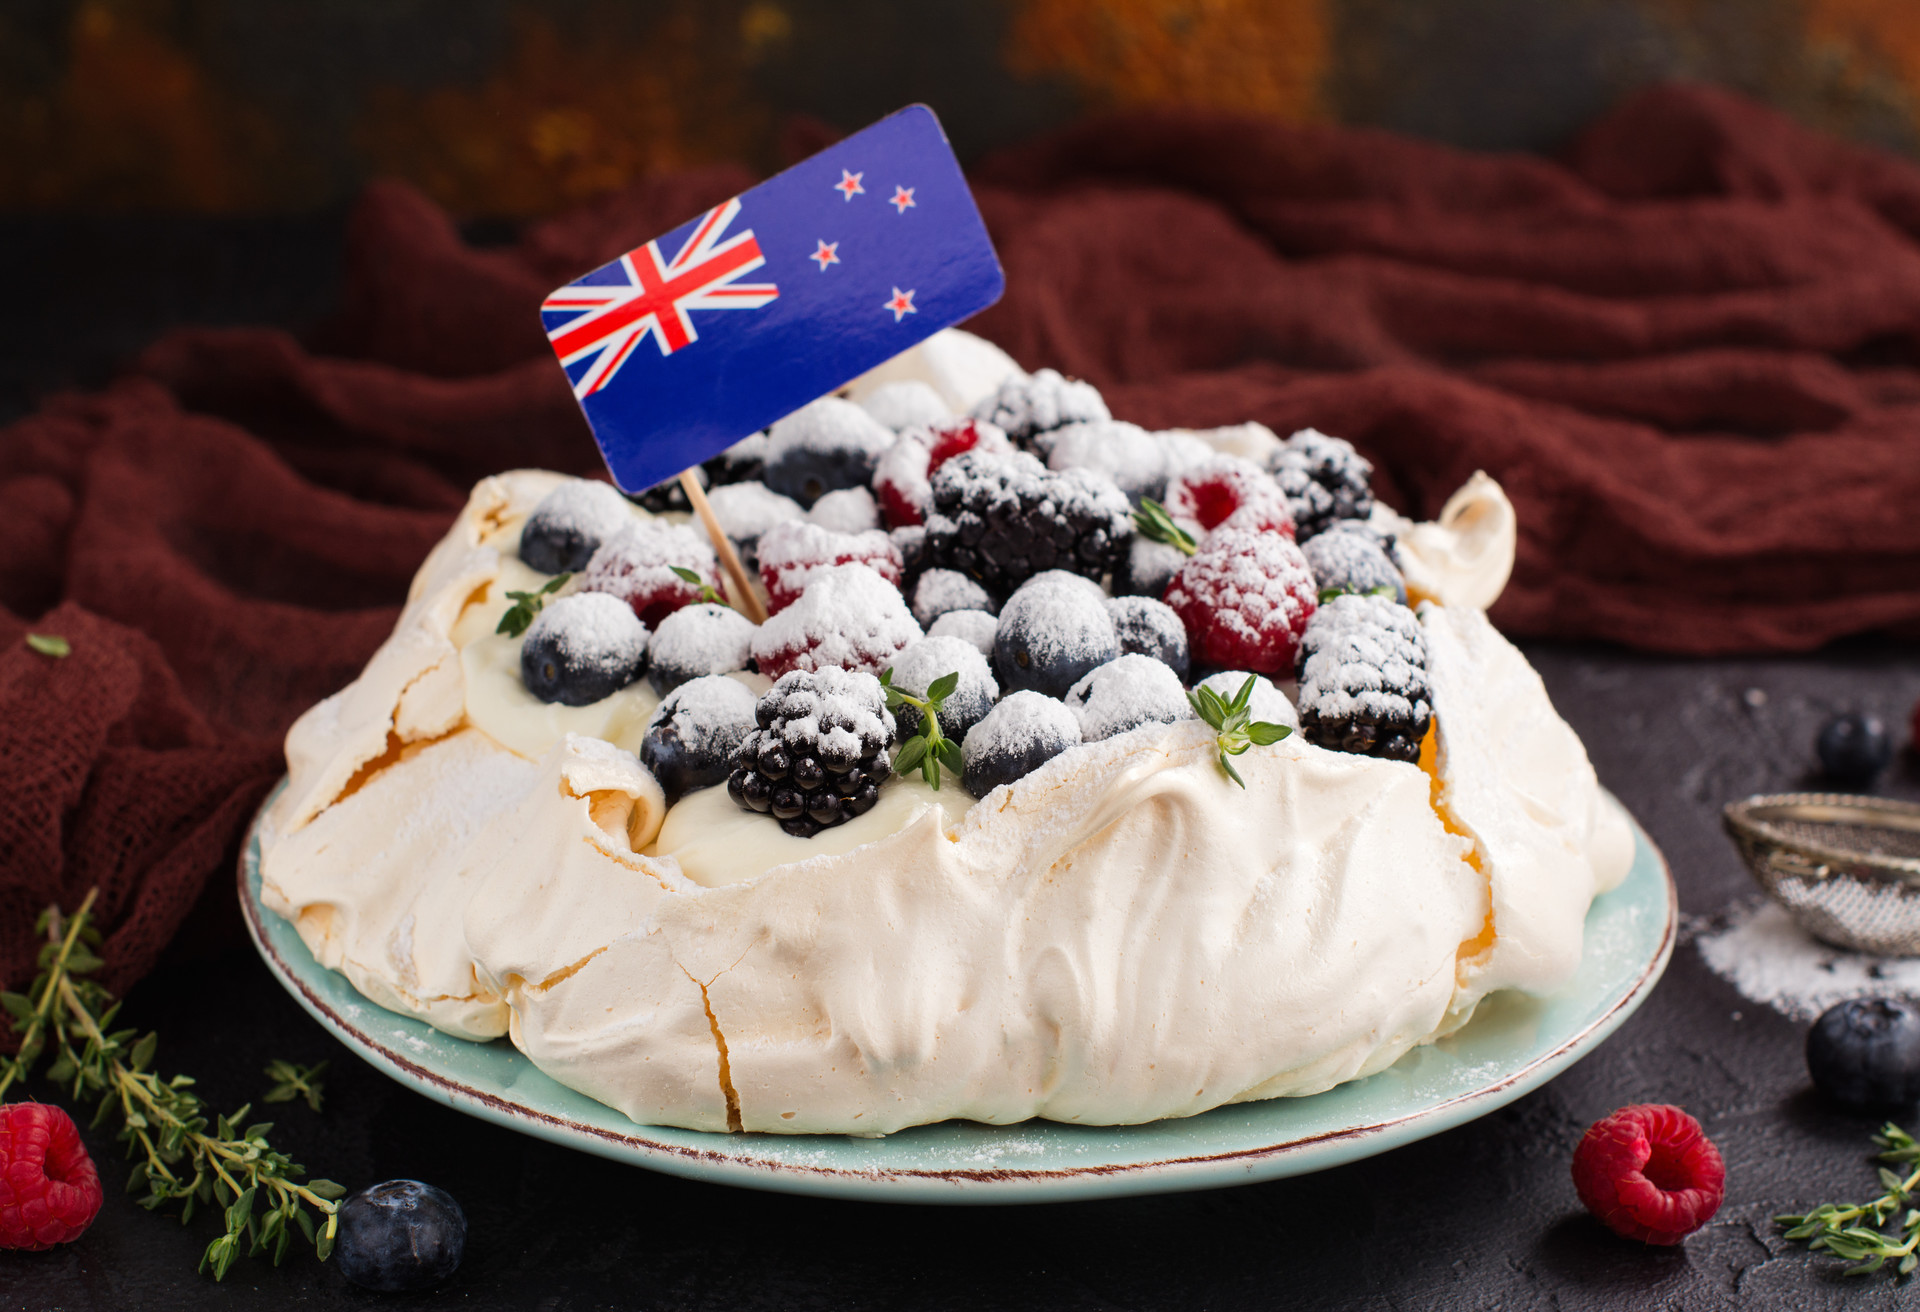 Delicious Pavlova cake with cream, berries thyme and New Zealand flag over dark background. Space for text. Selective focus; Shutterstock ID 530911201; Purpose: Virtual Christmas Guides; Brand (KAYAK, Momondo, Any): Kayak; Client/Licensee: KAYAK